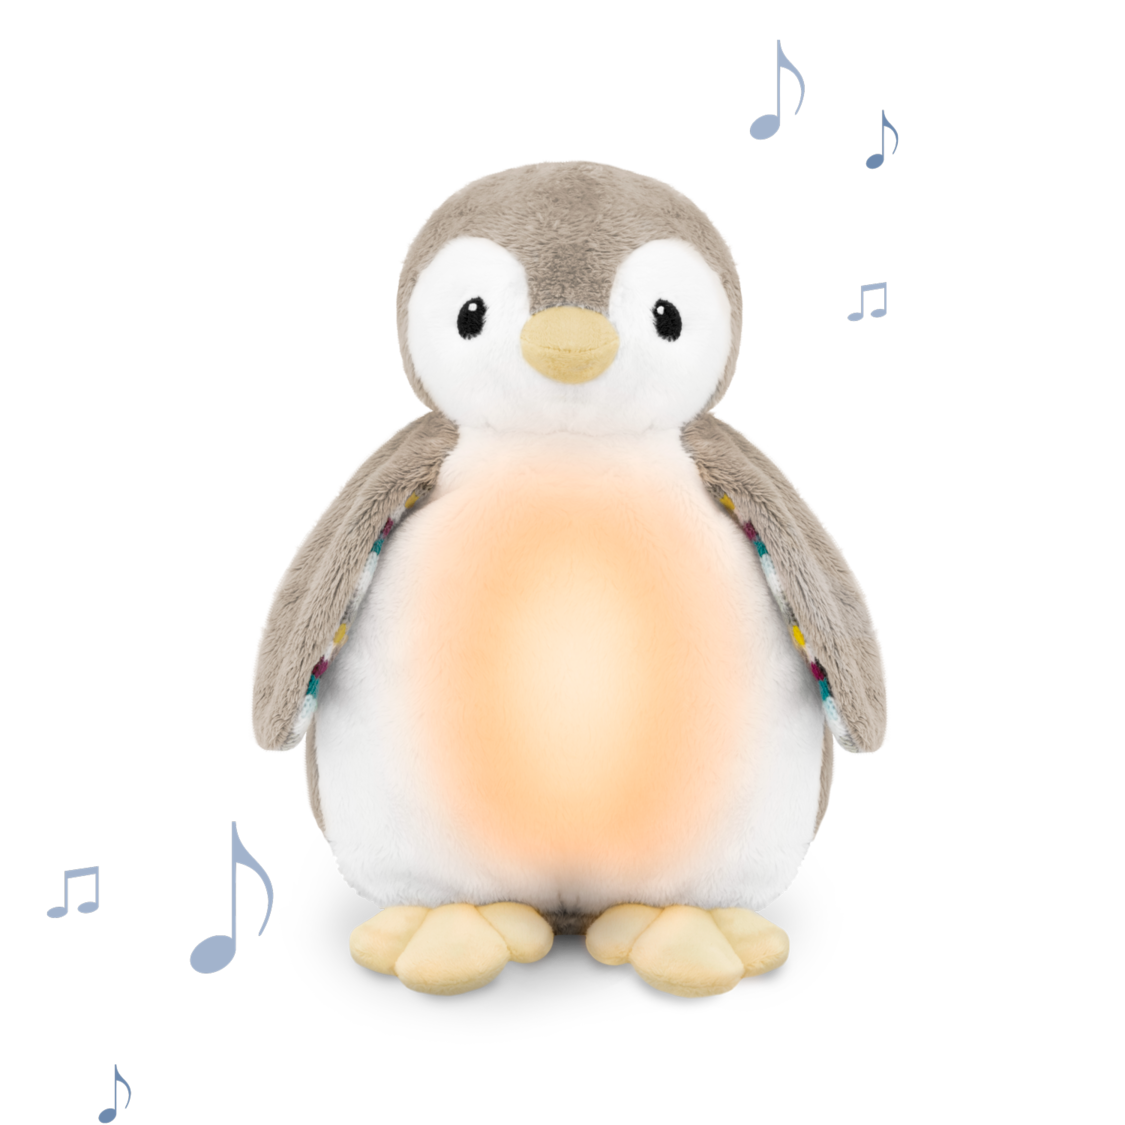 Zazu Soft Toy Sound Machines with Nightlight, 6 Melodies, Voice Recording and Cry Sensor - Phoebe the penguin